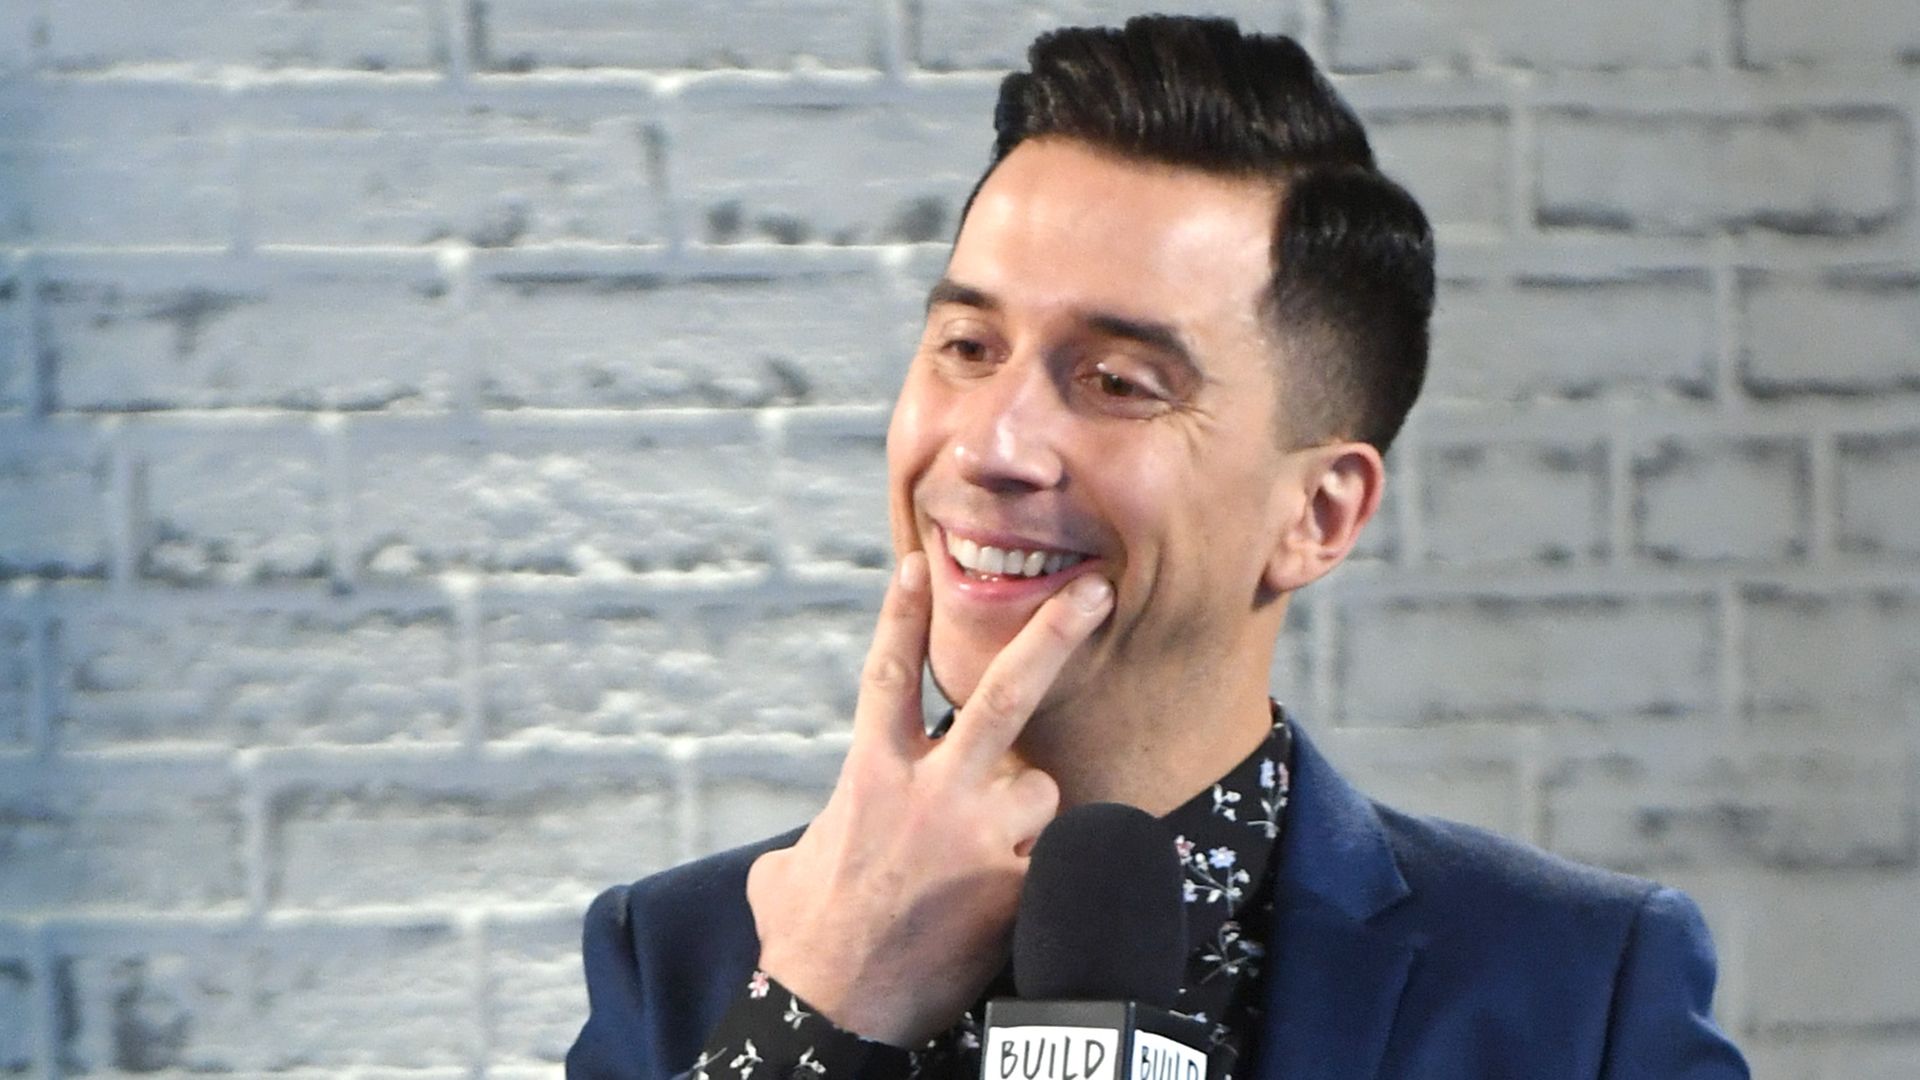 Comedian Russell Kane on March 21, 2017 in London, United Kingdom - Credit: Photo by Stuart C. Wilson/Getty Images